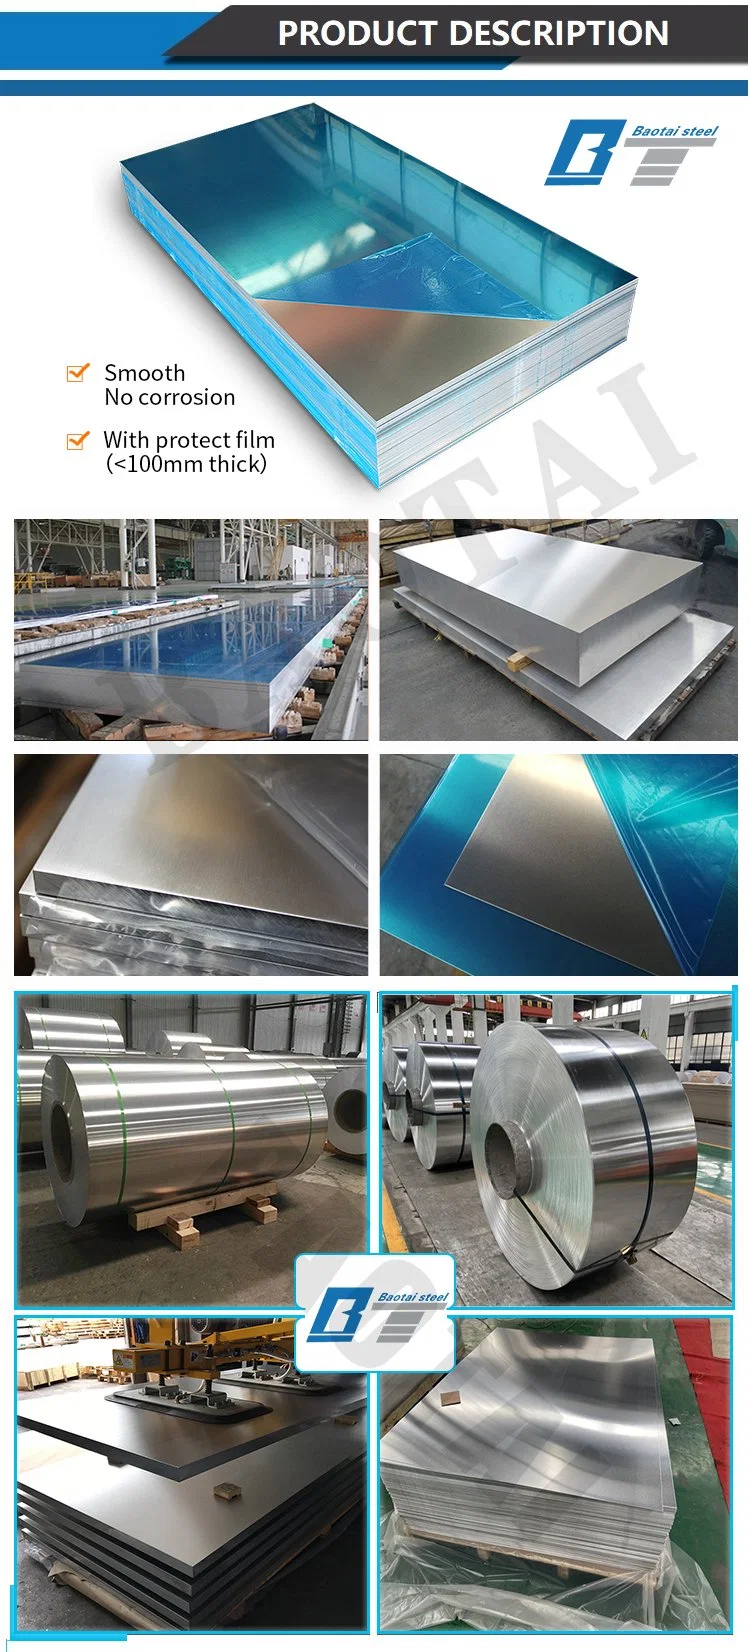 China Supplier 5052 H32 H22 H111 Aluminum Sheet for Embossed